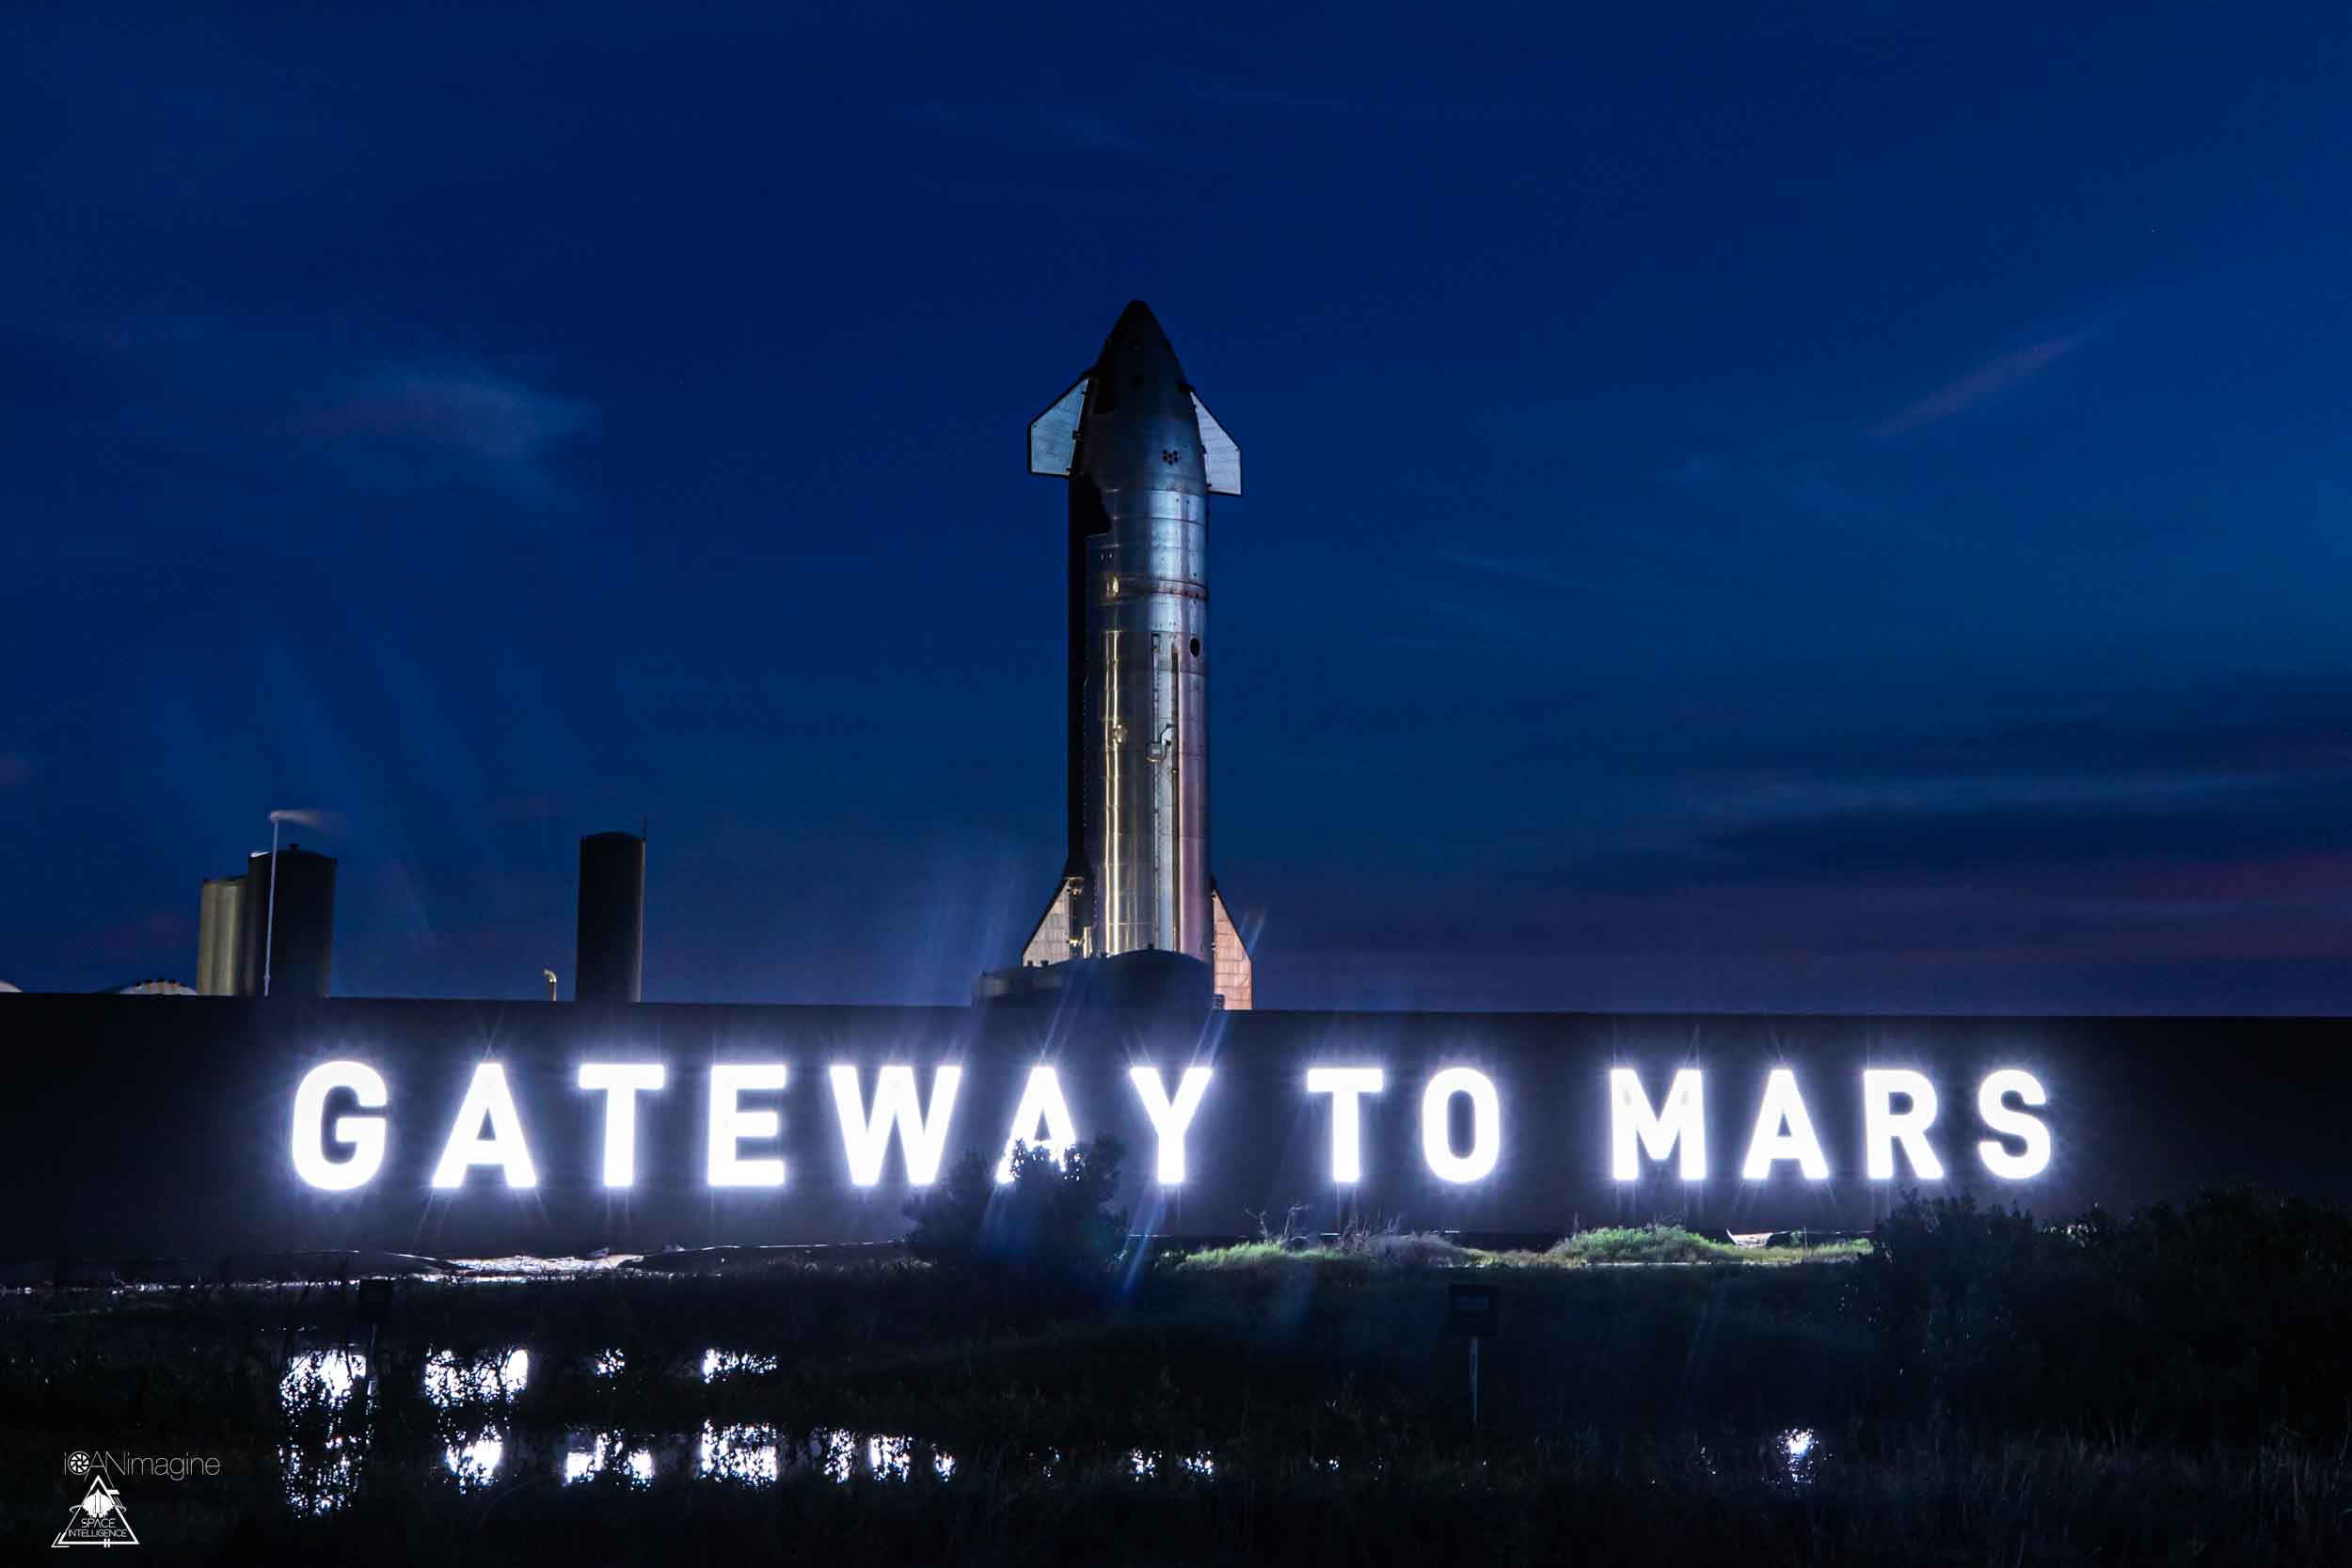 A Starship upper stage sits behind the illuminated "Gateway to Mars" neon sign at the Starbase launch site.